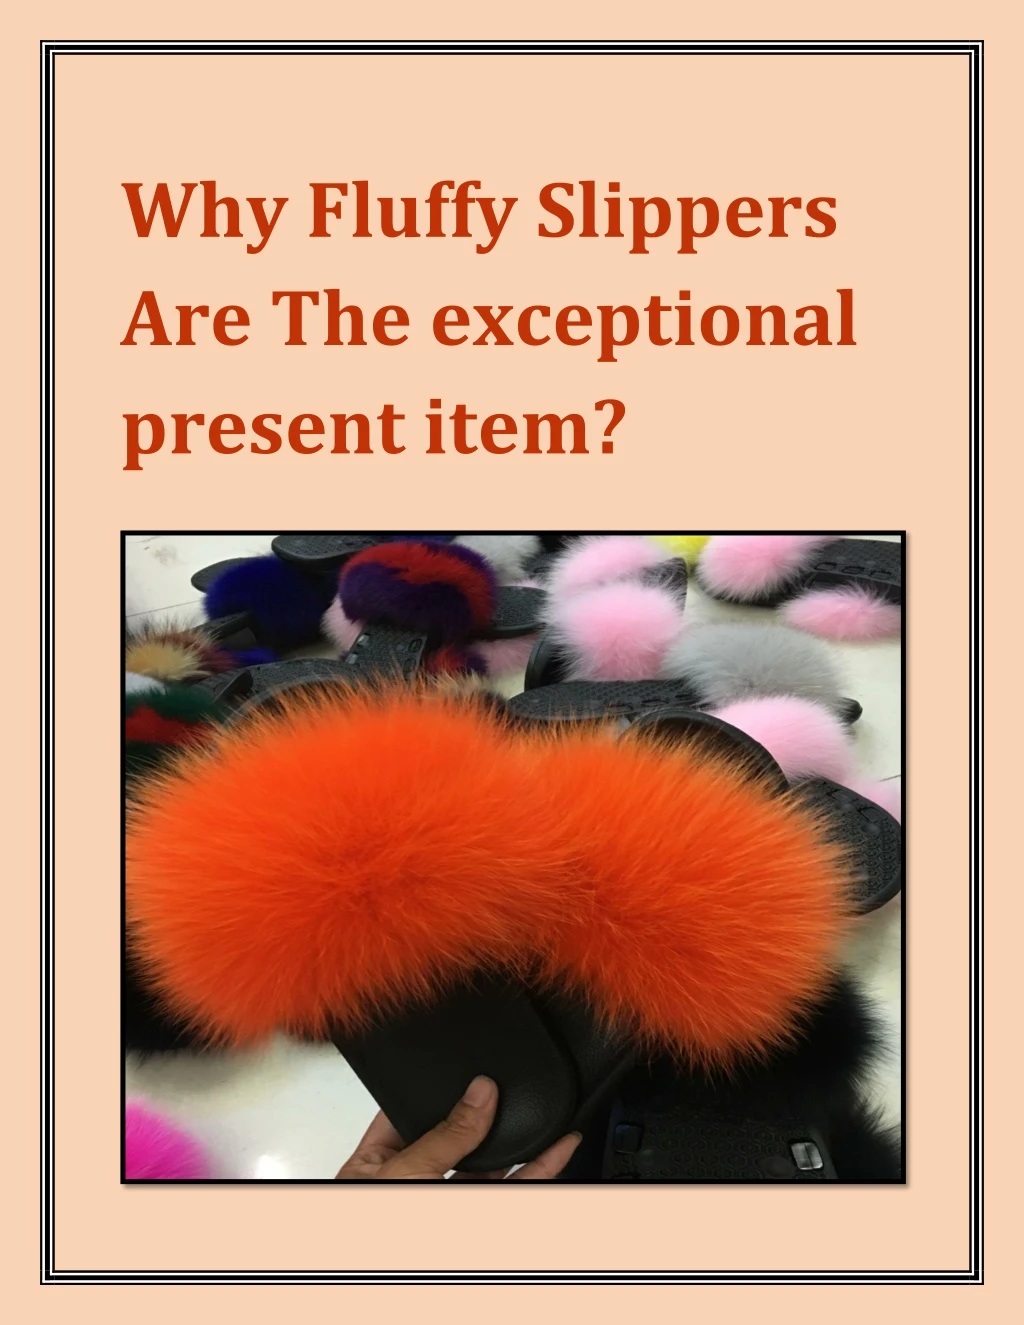 why fluffy slippers are the exceptional present